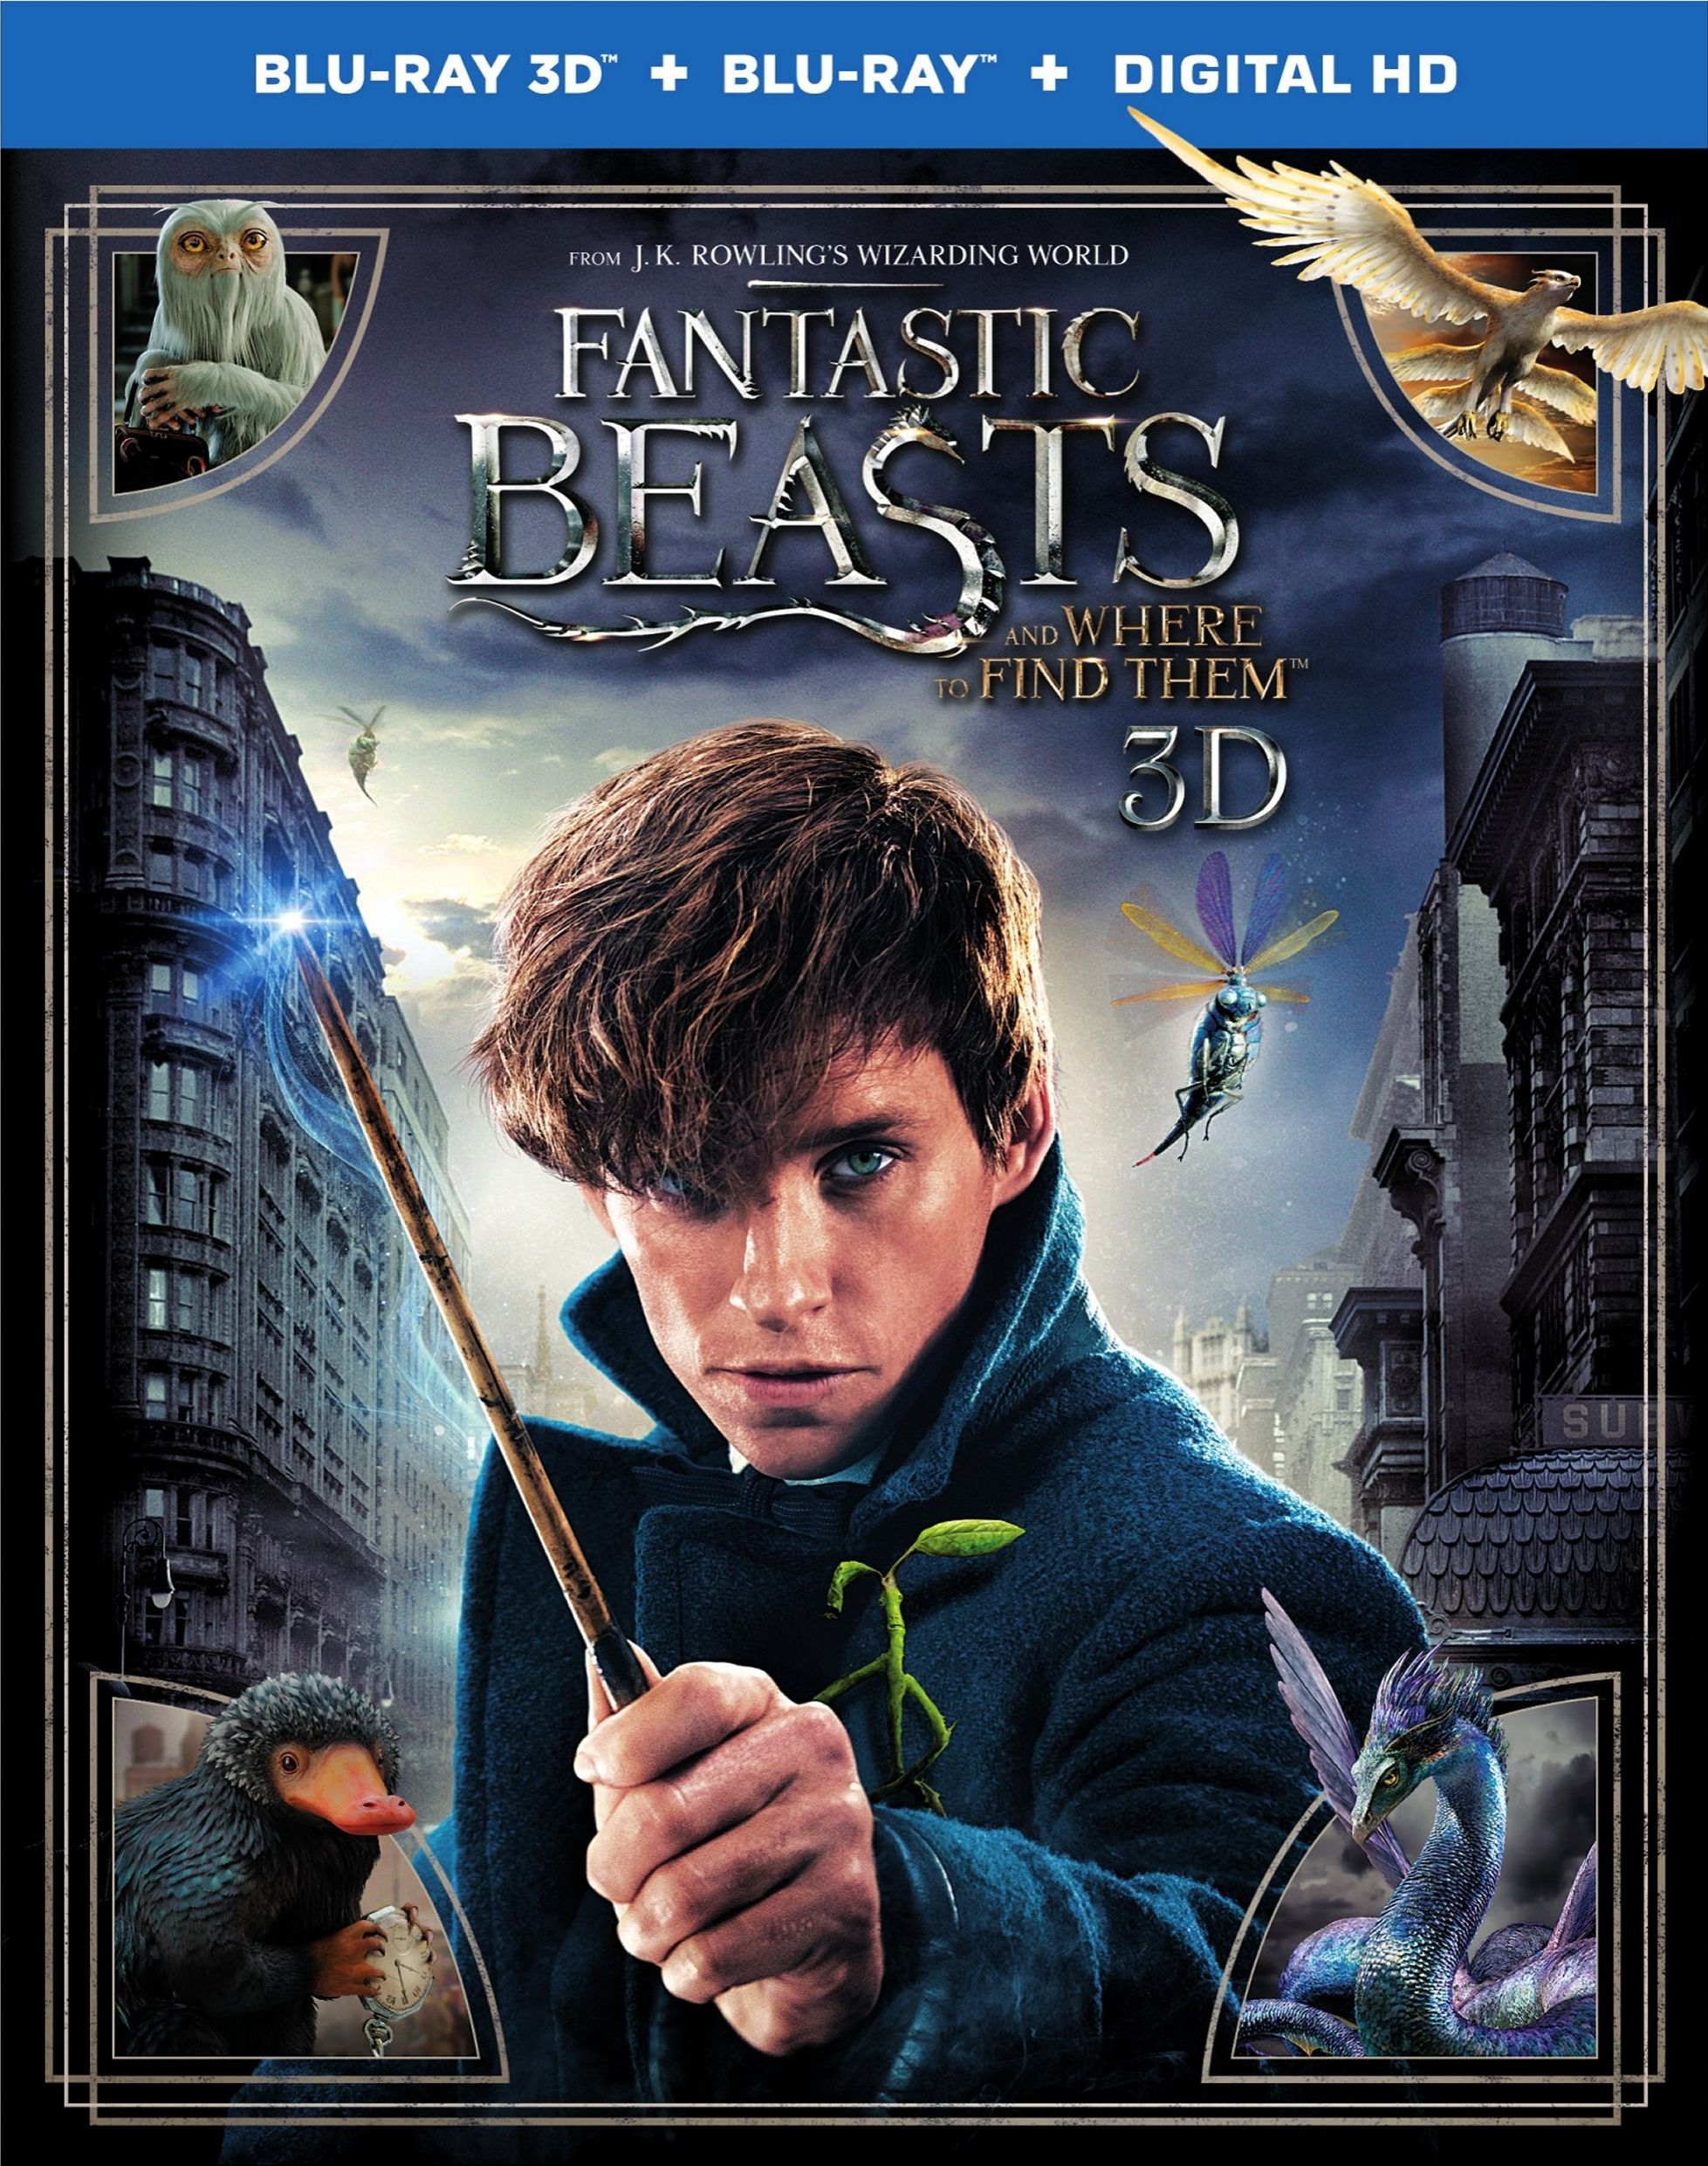 Click Here to watch the Fantastic Beasts trailer!